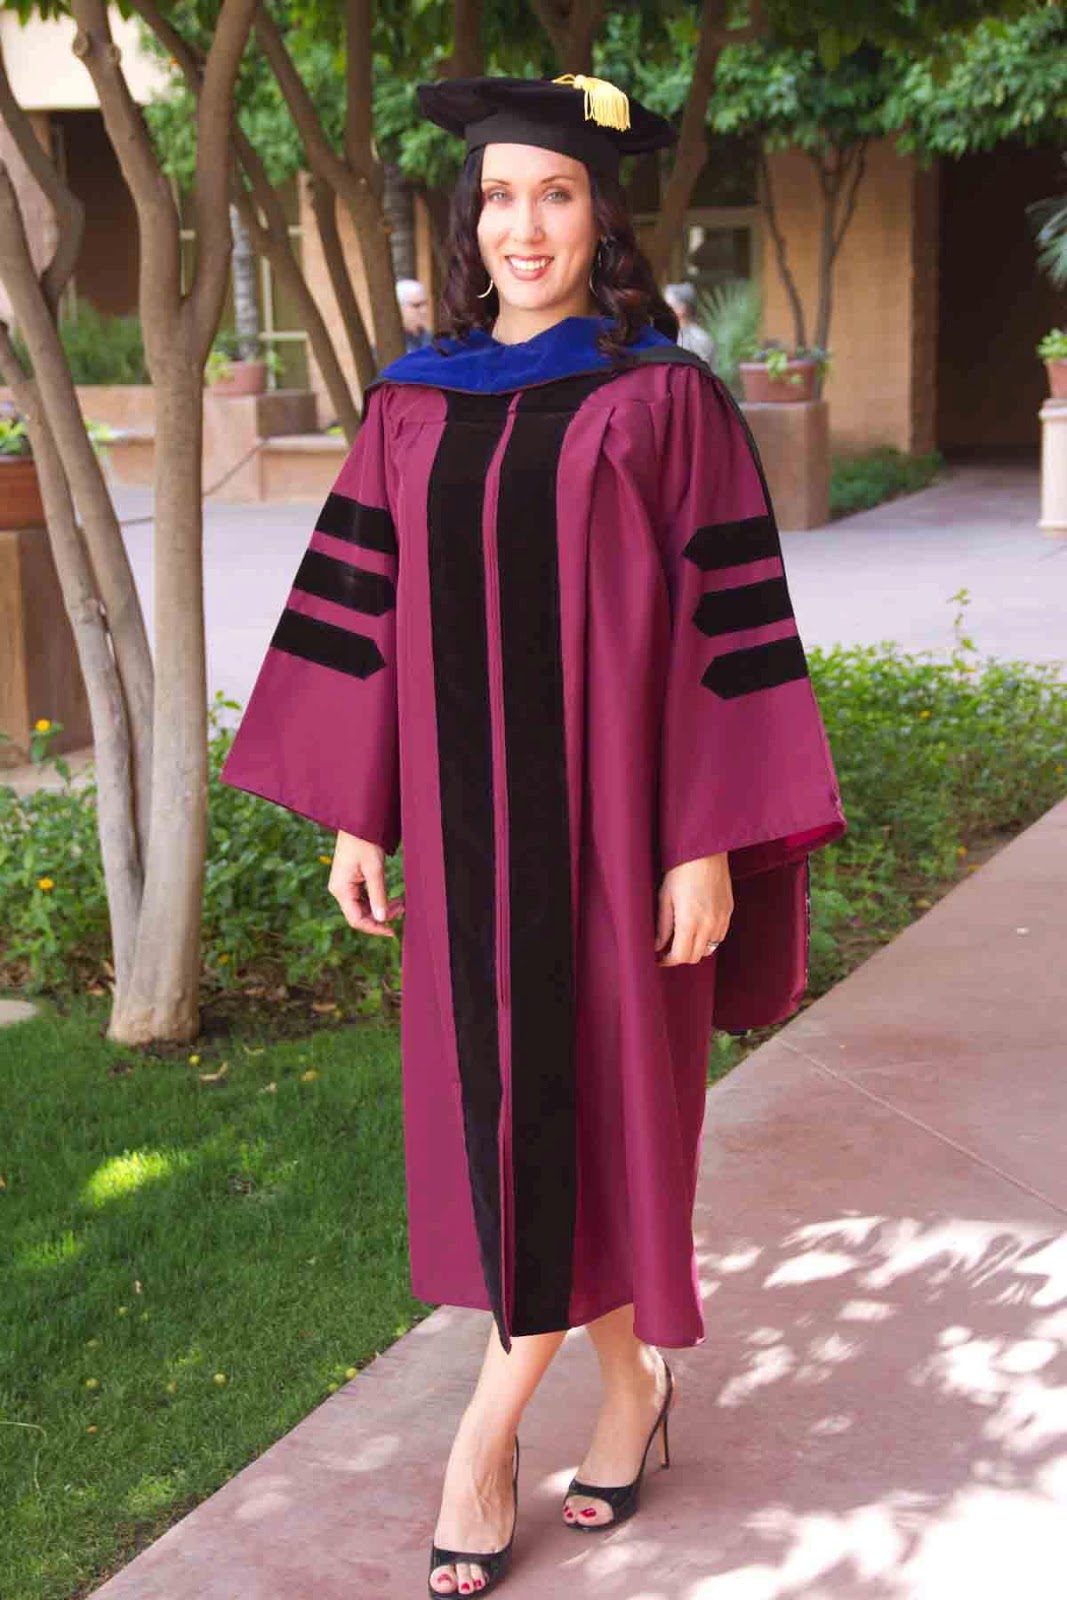 Cap 'n Gown Portraits | Renell Fox, May 08 ASU Graduation, S… | Flickr